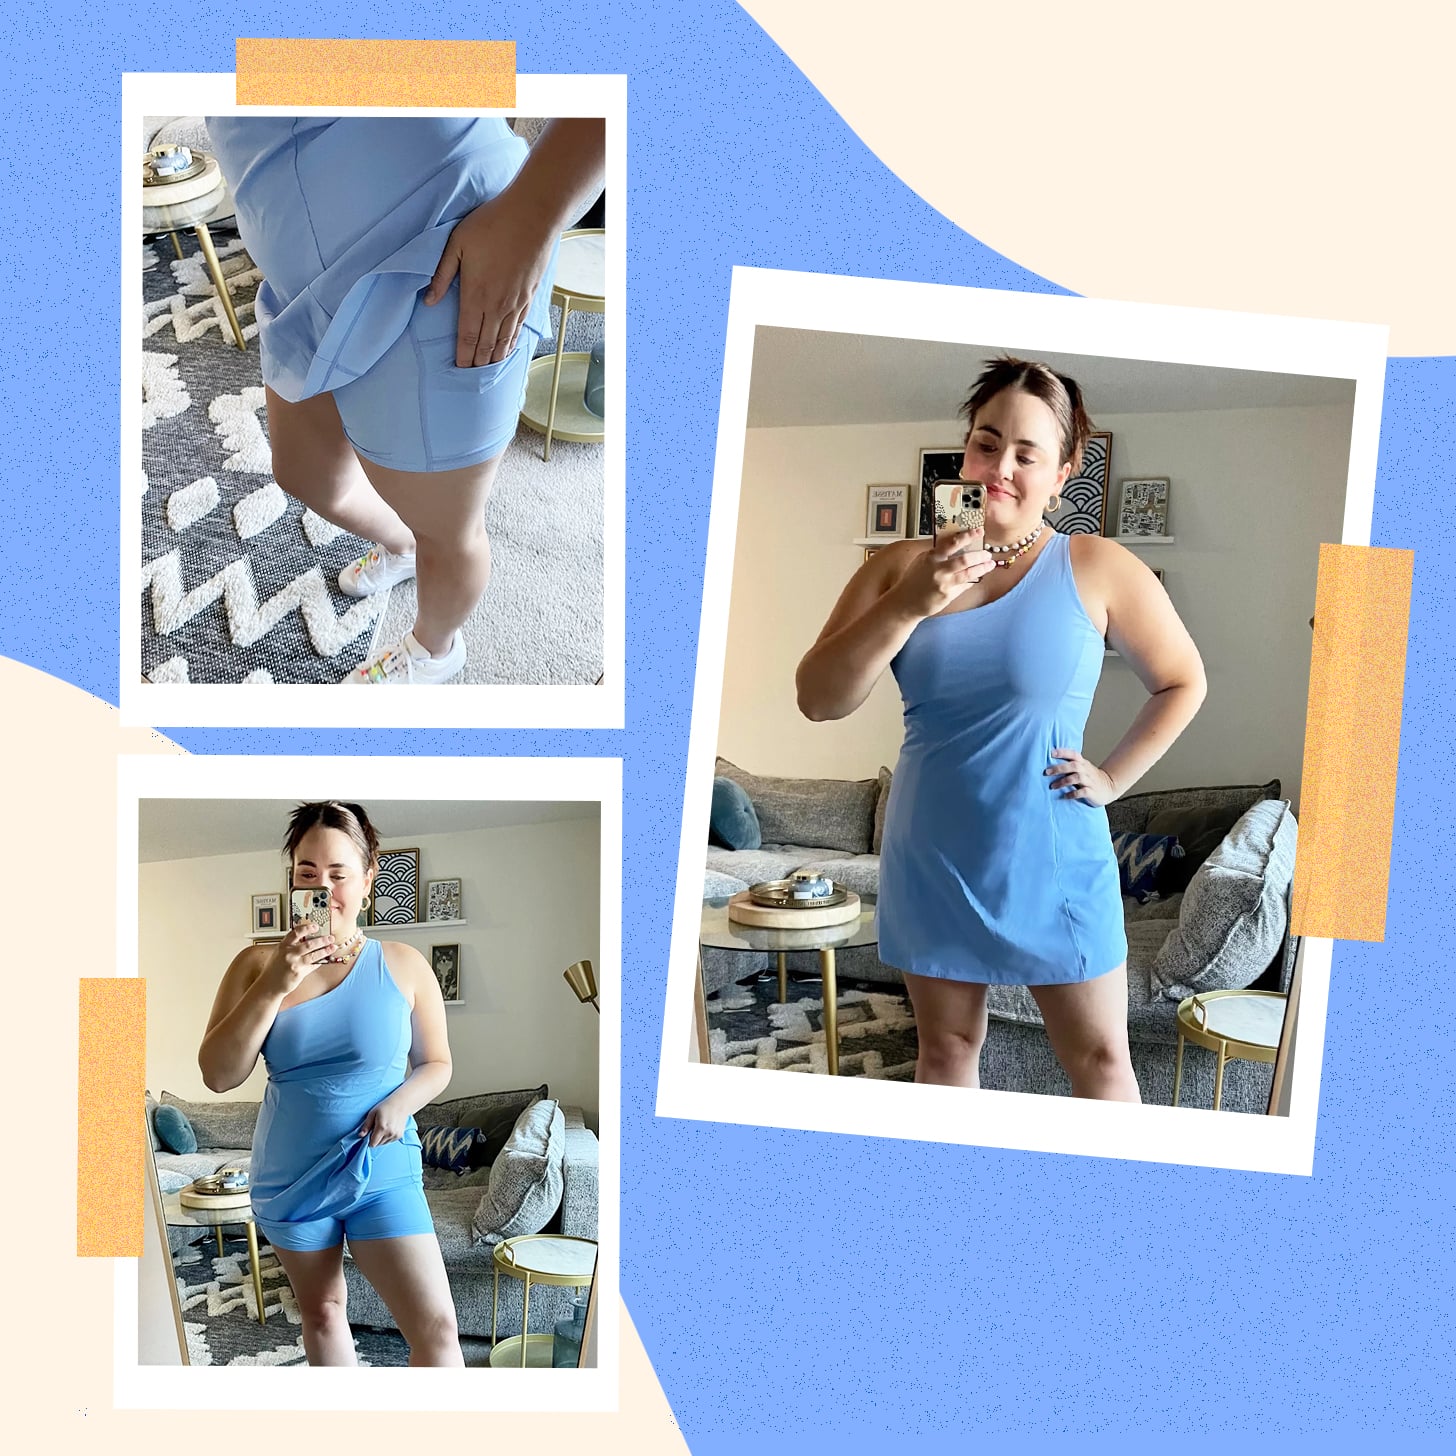 Outdoor Voices Exercise Dress Review: Is it worth it? - Reviewed